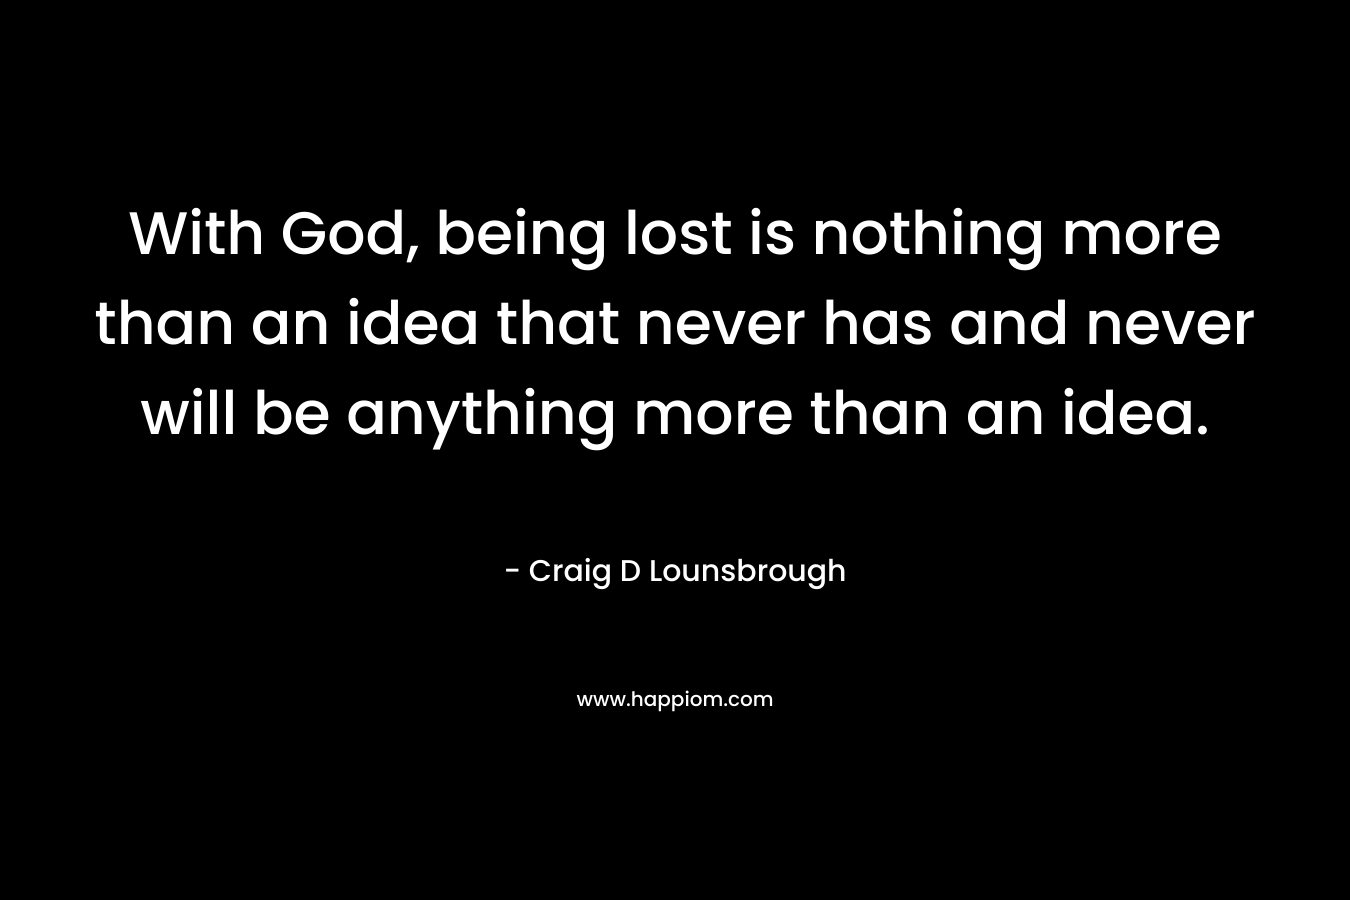 With God, being lost is nothing more than an idea that never has and never will be anything more than an idea.